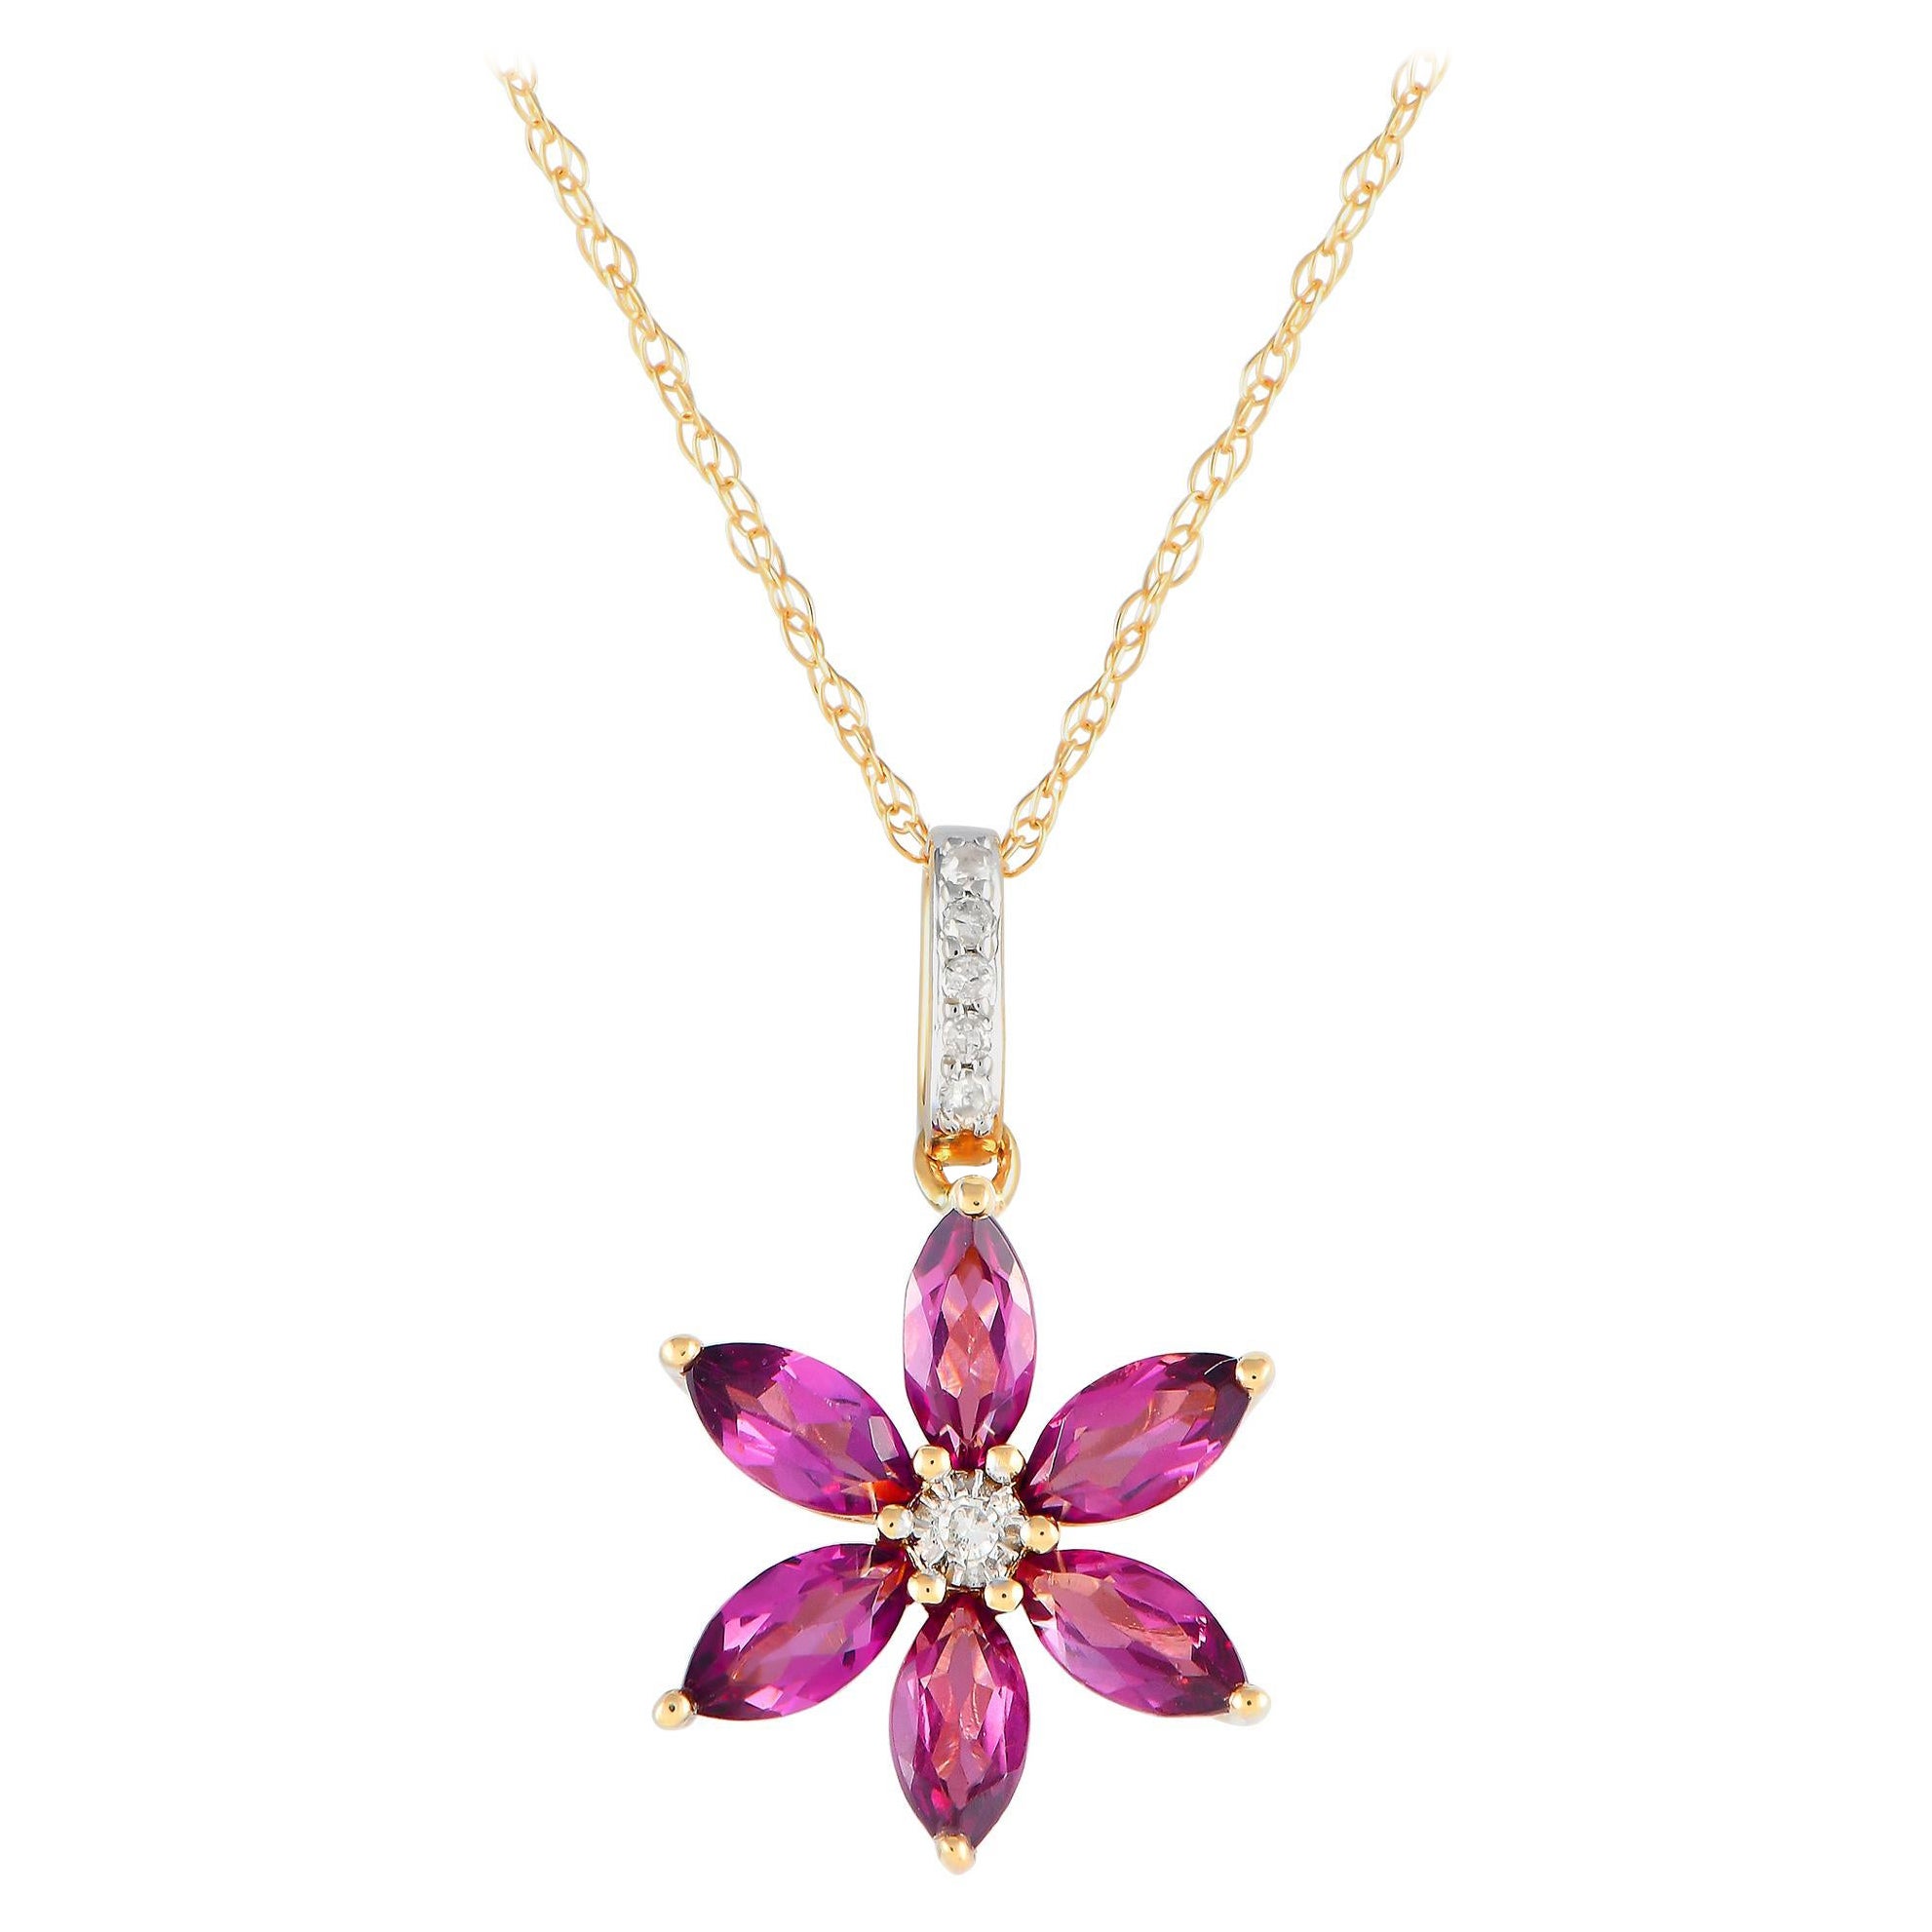 LB Exclusive 14K Yellow Gold 0.01ct Diamond & Rhodolite Necklace PD4-16241YRHOD For Sale